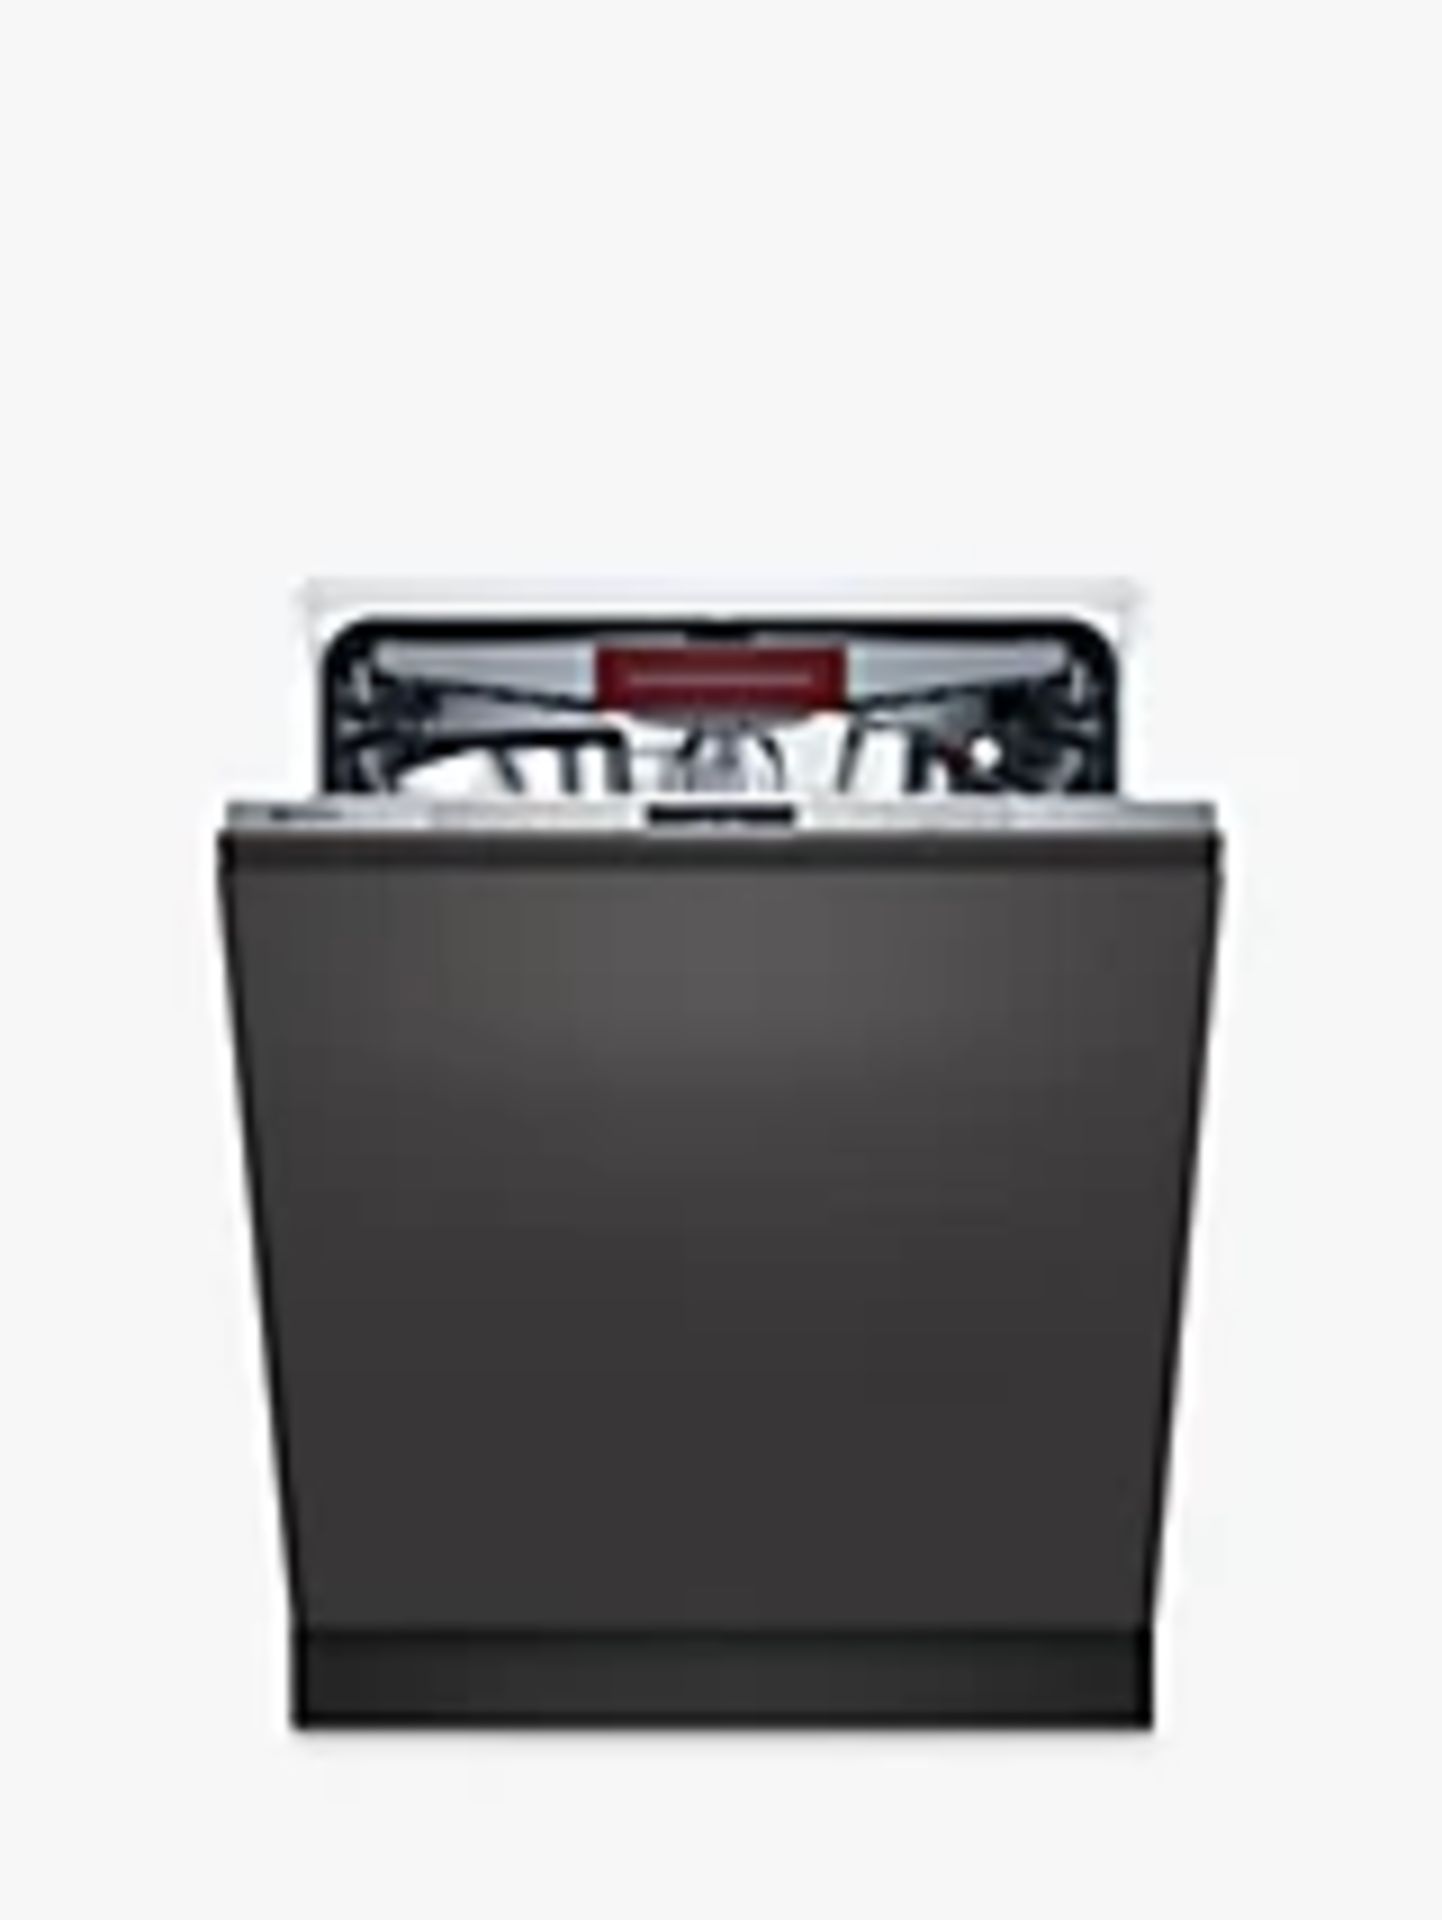 Grade B Neff N50 S155HCX27G Fully Integrated Dishwasher - RRP: £629 - Image 4 of 4